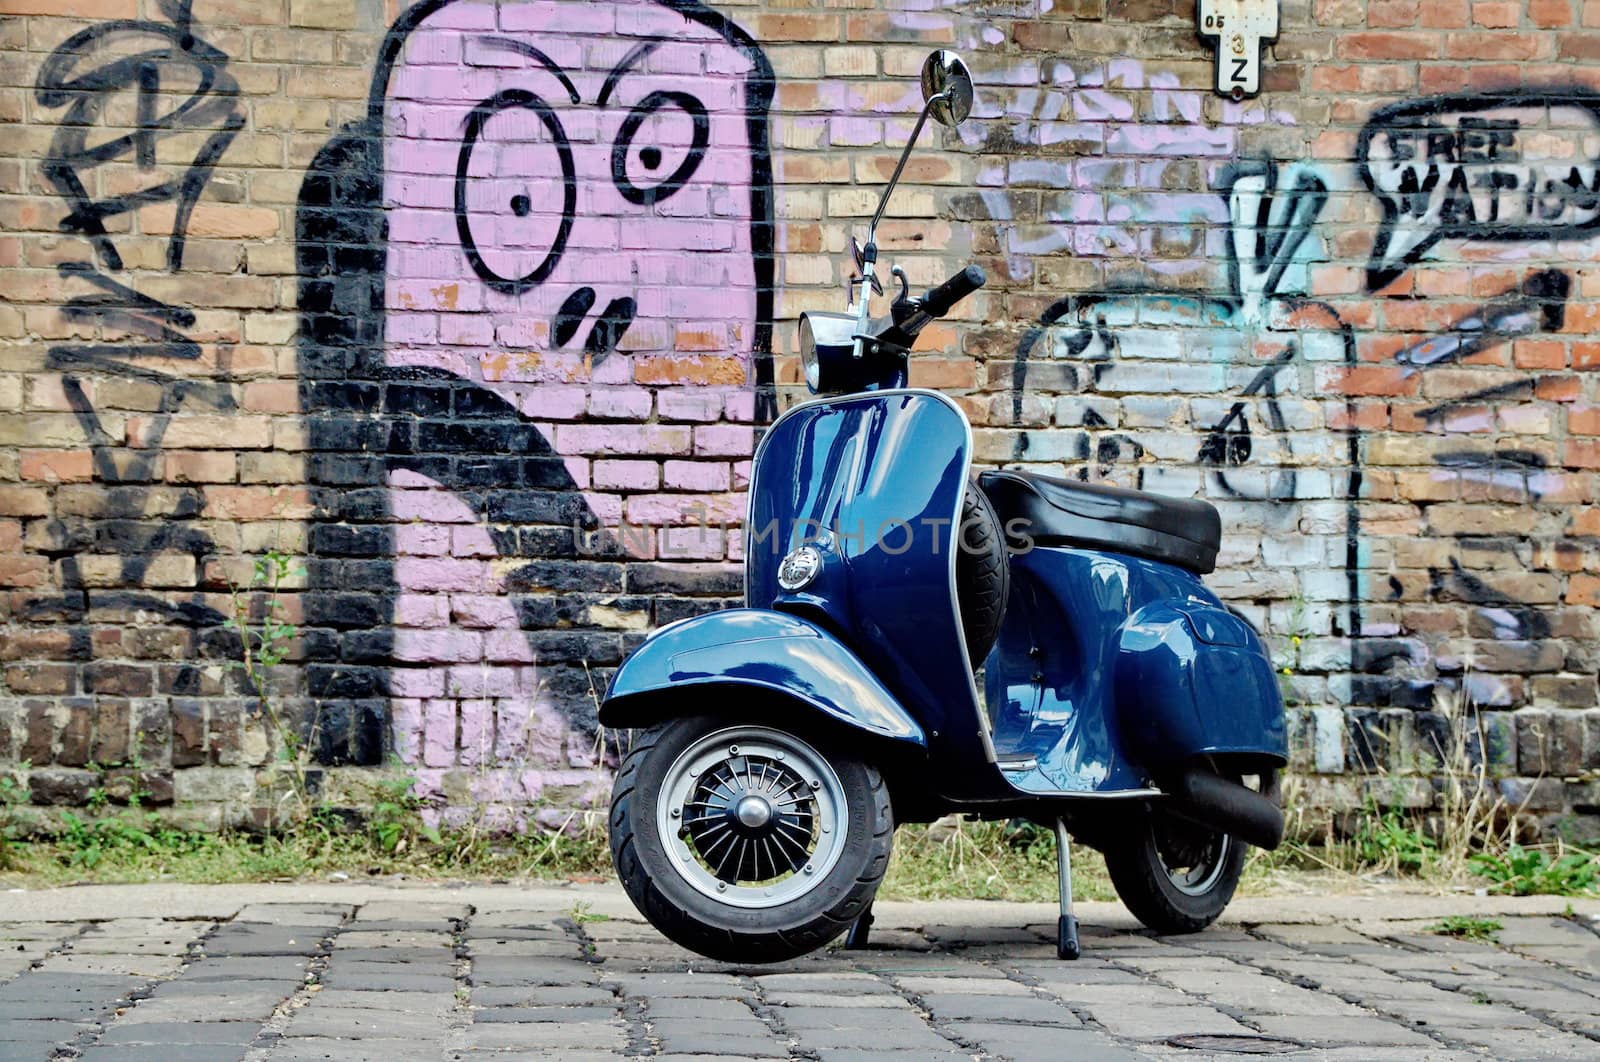 Scooter in front of a wall